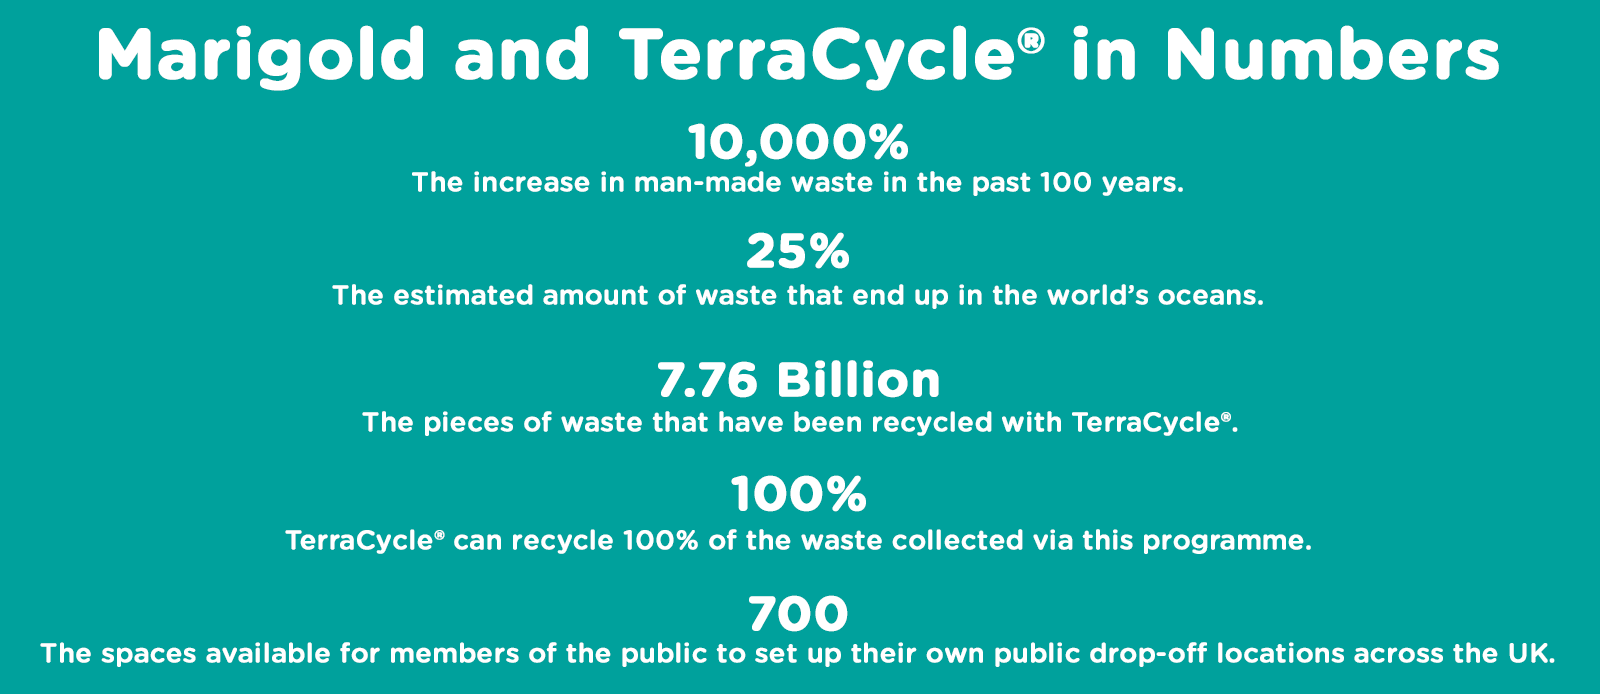 Marigold and TerraCycle in Partnership